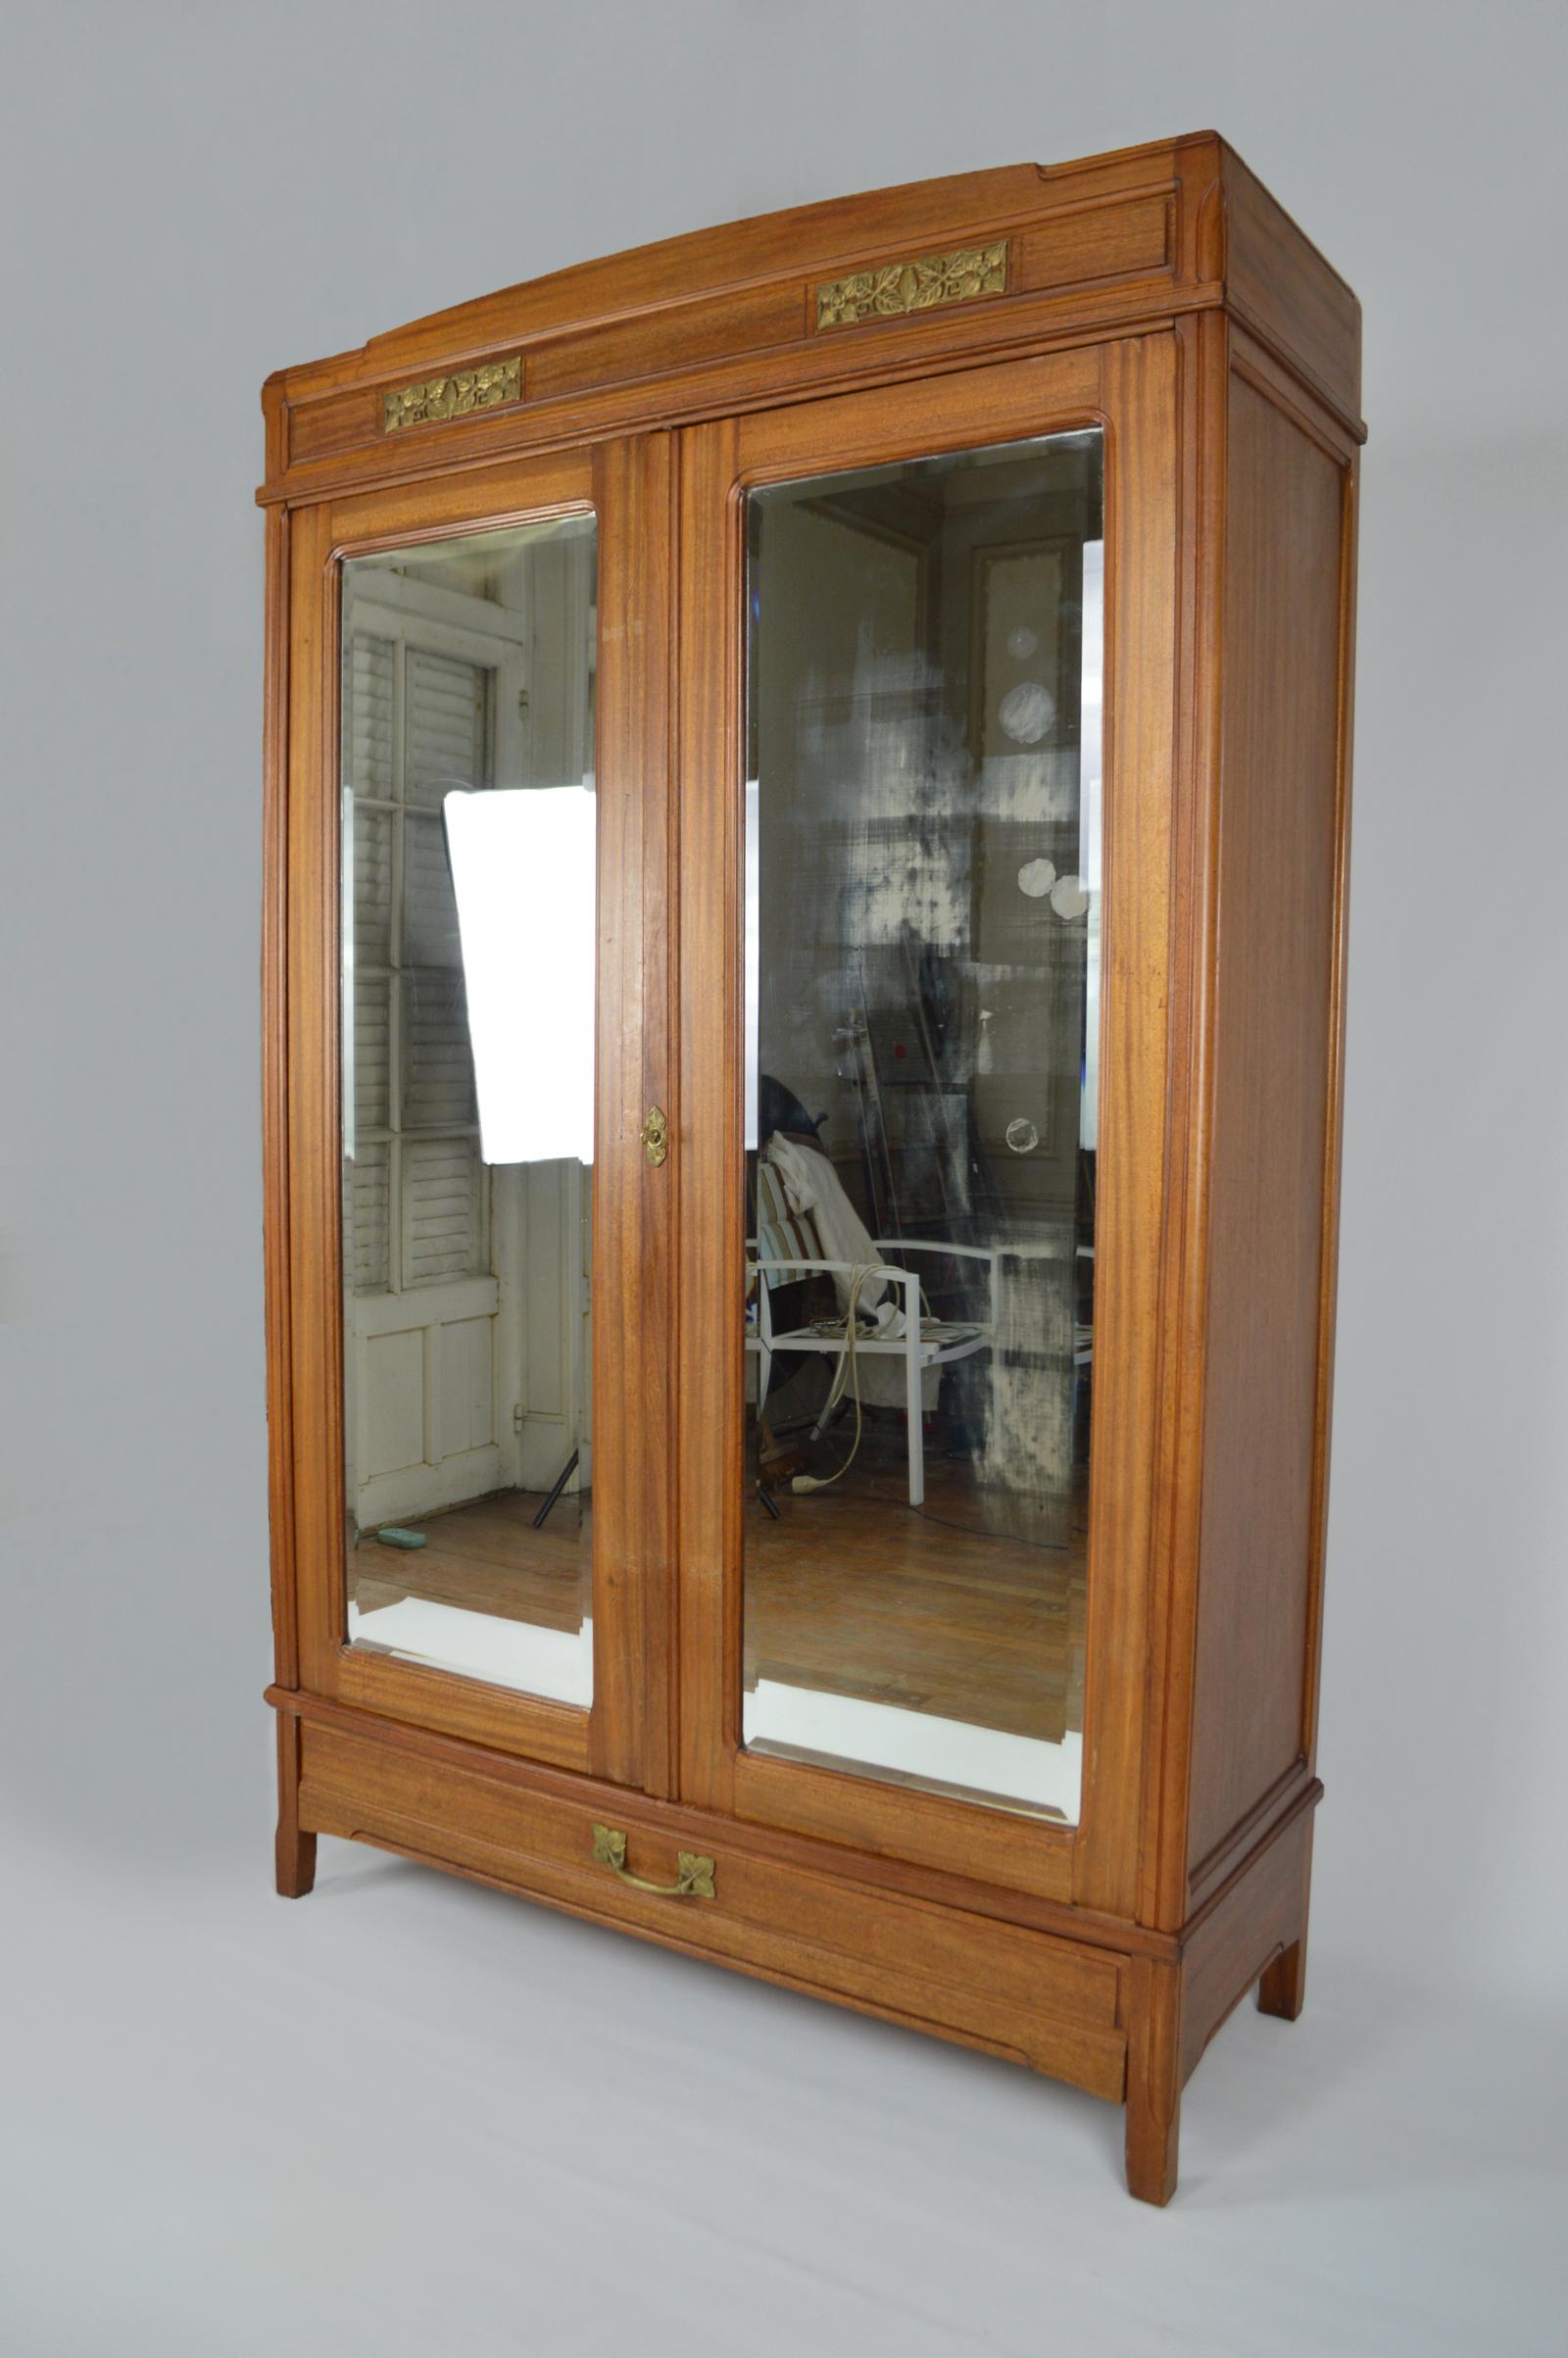 Superb set composed of 3 elements: 1 large wardrobe, 1 bed, 1 bedside tables / nightstands.

French Art Nouveau, circa 1920, by Mathieu Gallerey.

Beautiful quality of manufacture, the 3 pieces are in mahogany, bronzes (handles, entrances of